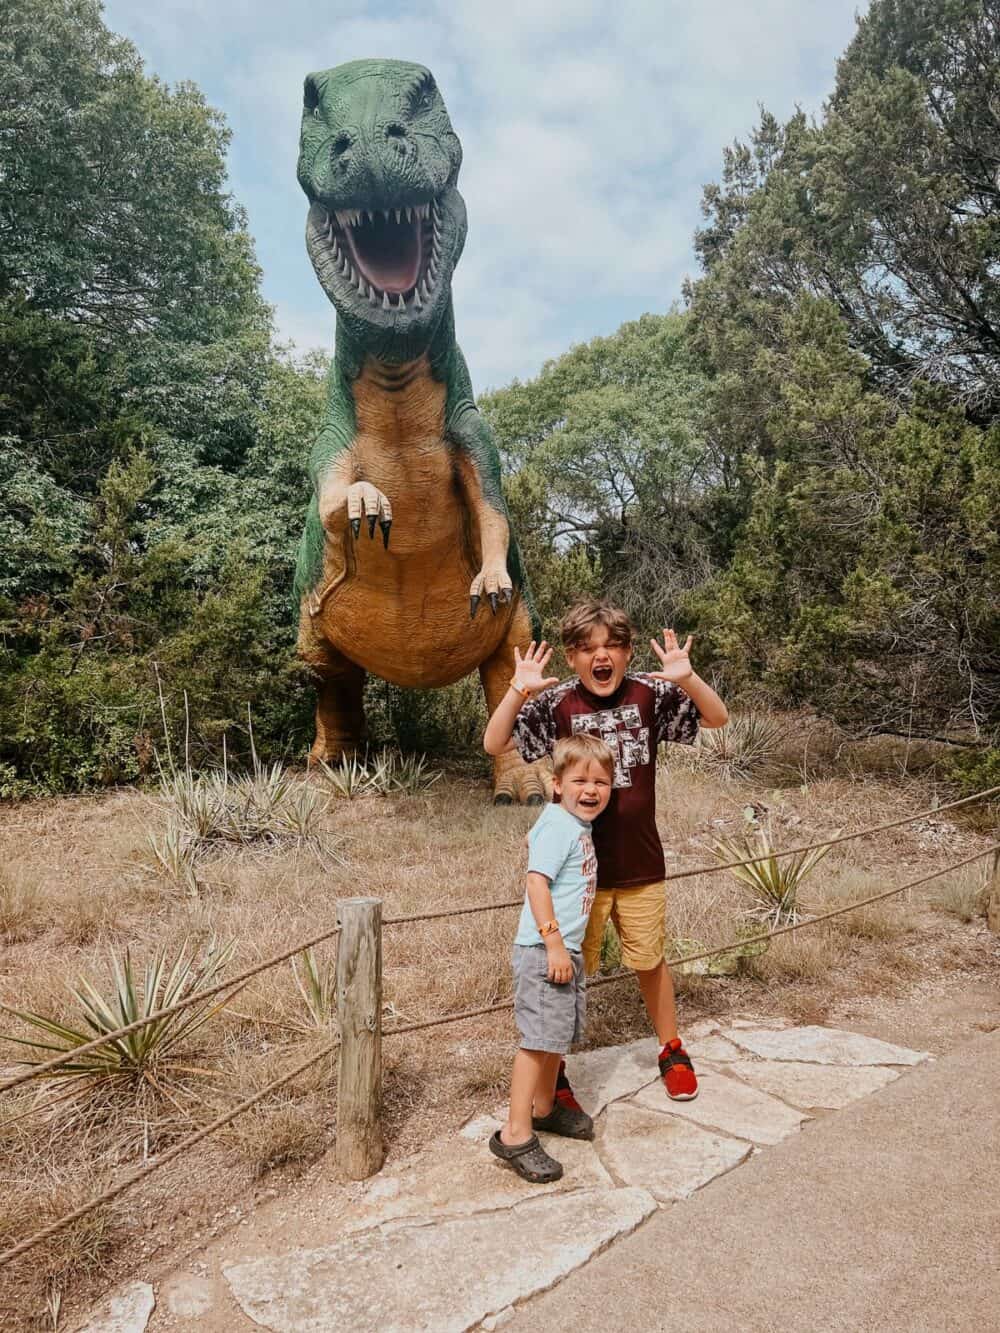 Two young boys standing in front of a dinosaur replica at Dinosaur World in Glen Rose